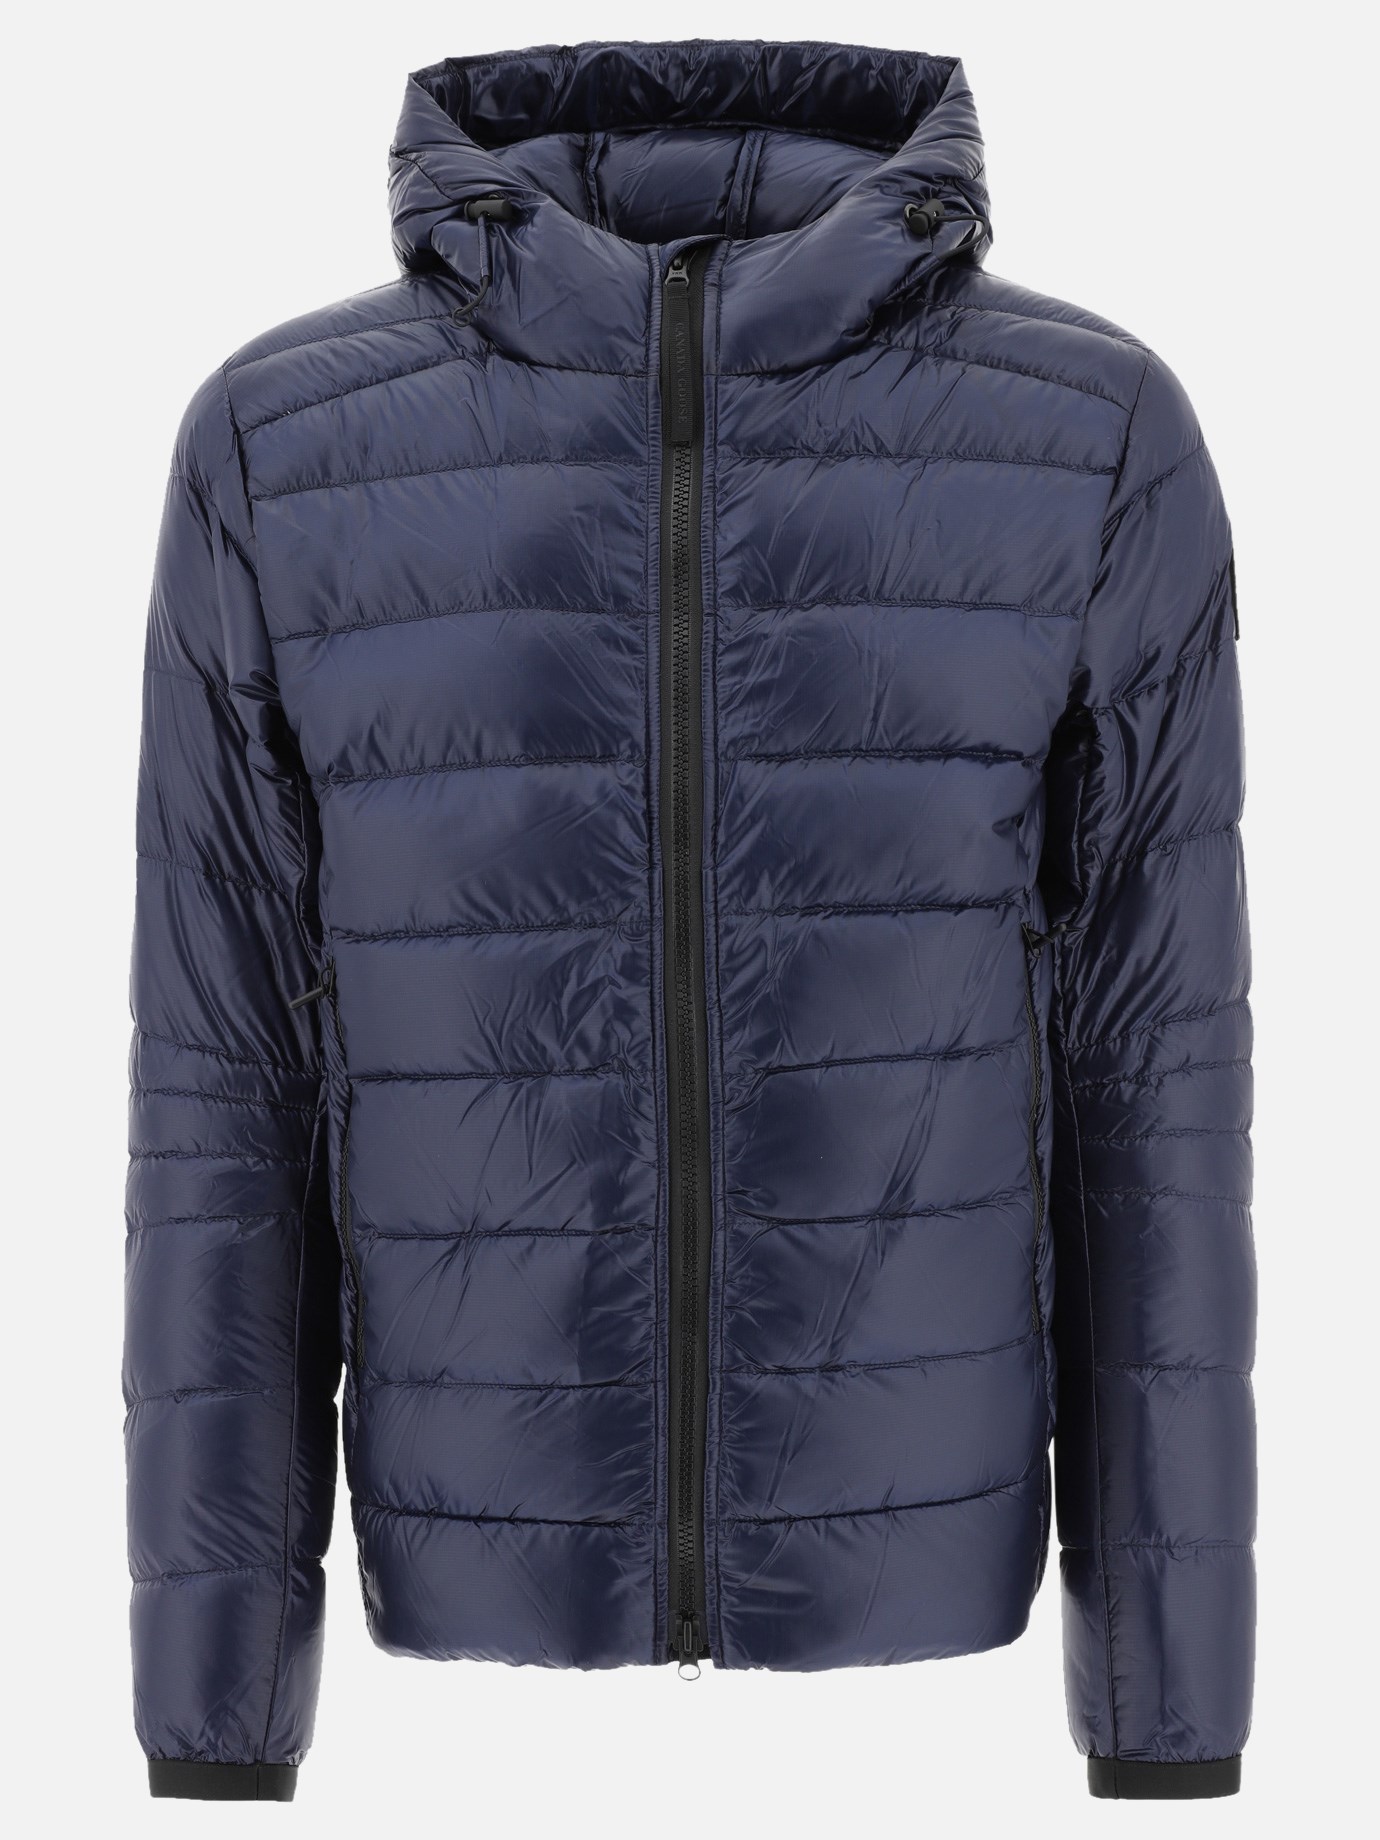  Crofton  down jacket by Canada Goose